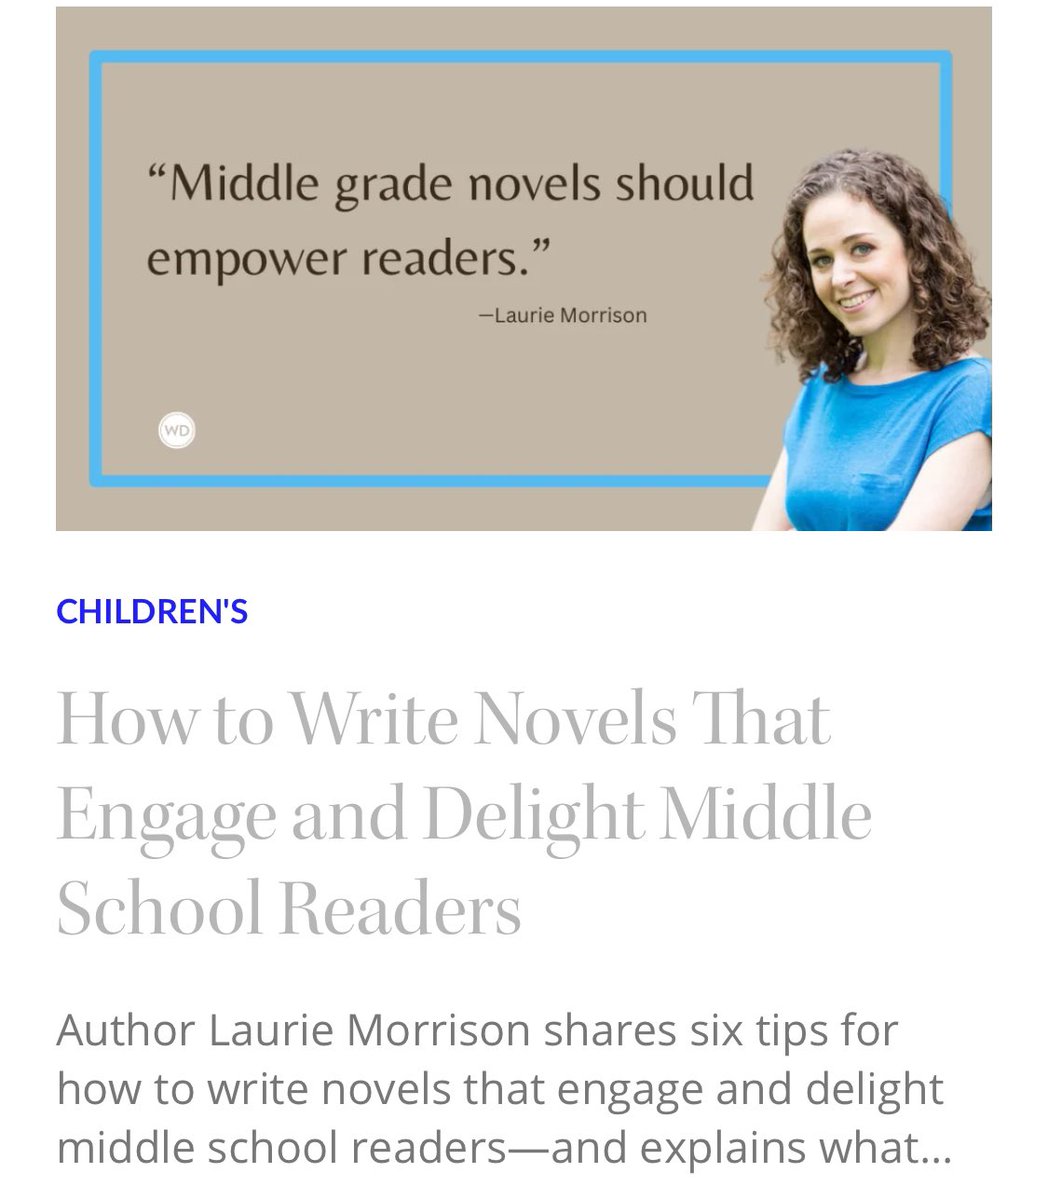 If you want to write & publish #upperMG novels, check out the piece I wrote for @WritersDigest, which includes a working definition of upper middle grade, my top six tips, & shoutouts to Rebecca Stead, @Barbaradee2, @ThatMGBookChick, & @ChadGALucas! writersdigest.com/write-better-f…